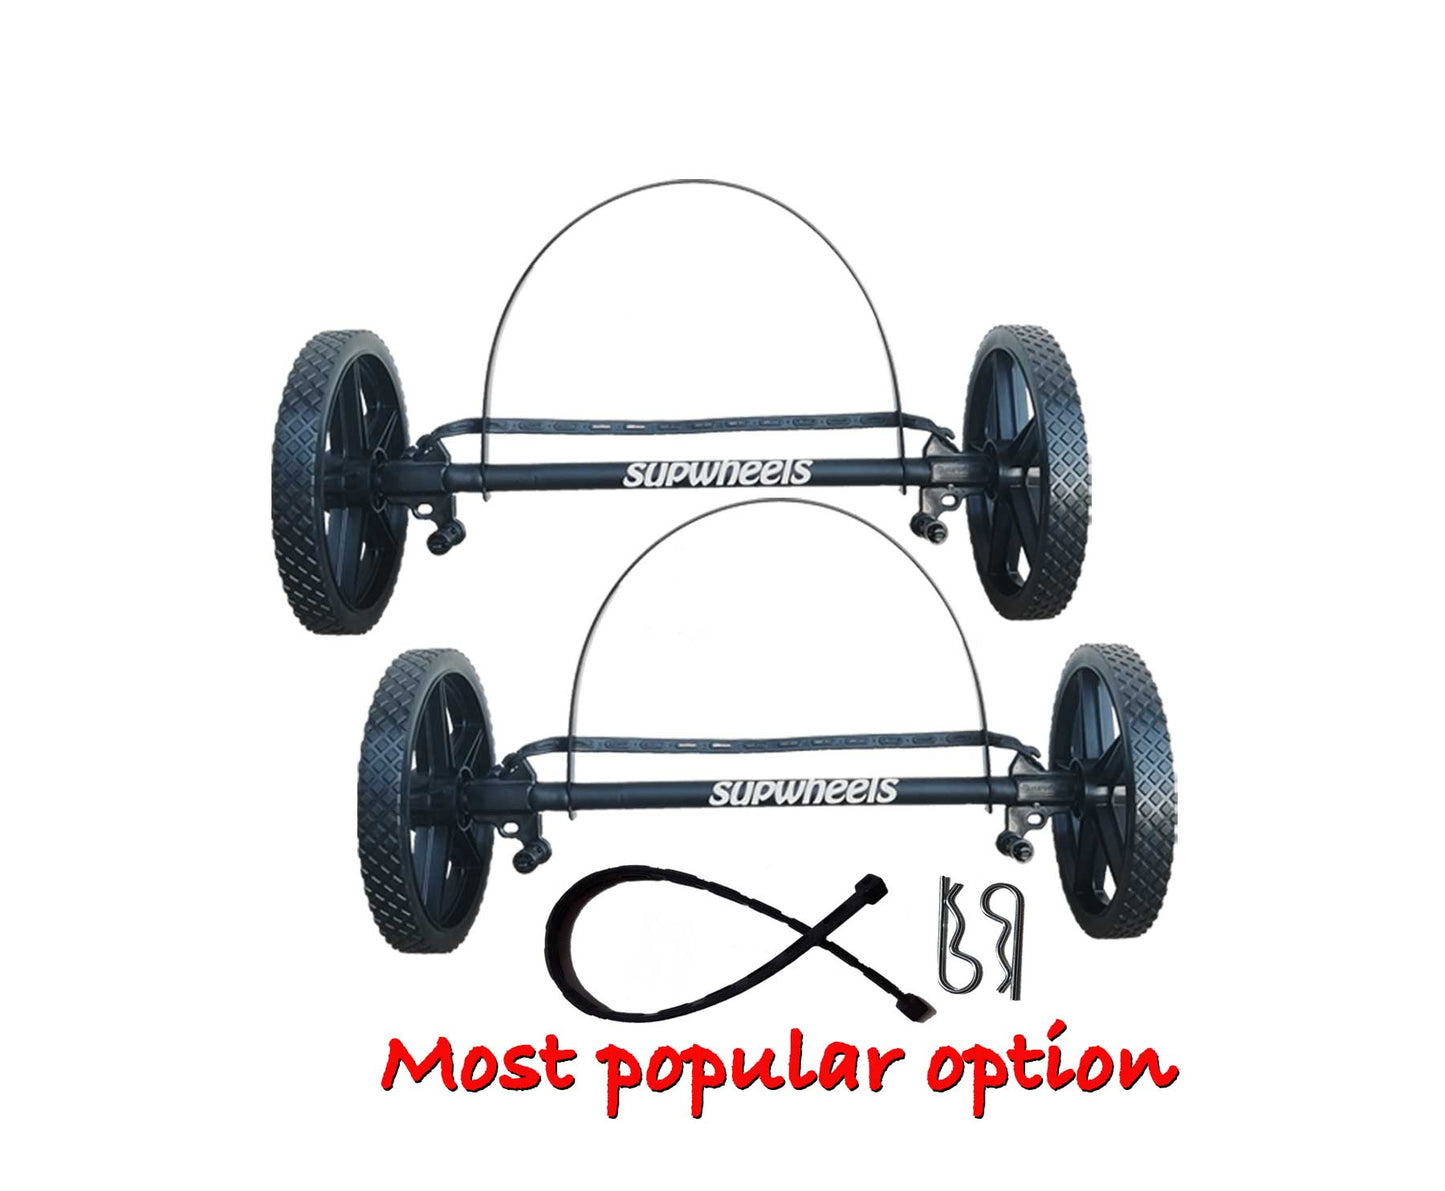 TWO PACK - EVOLUTION Paddle Board Bike Trailer - with strap handle (bike or walk)